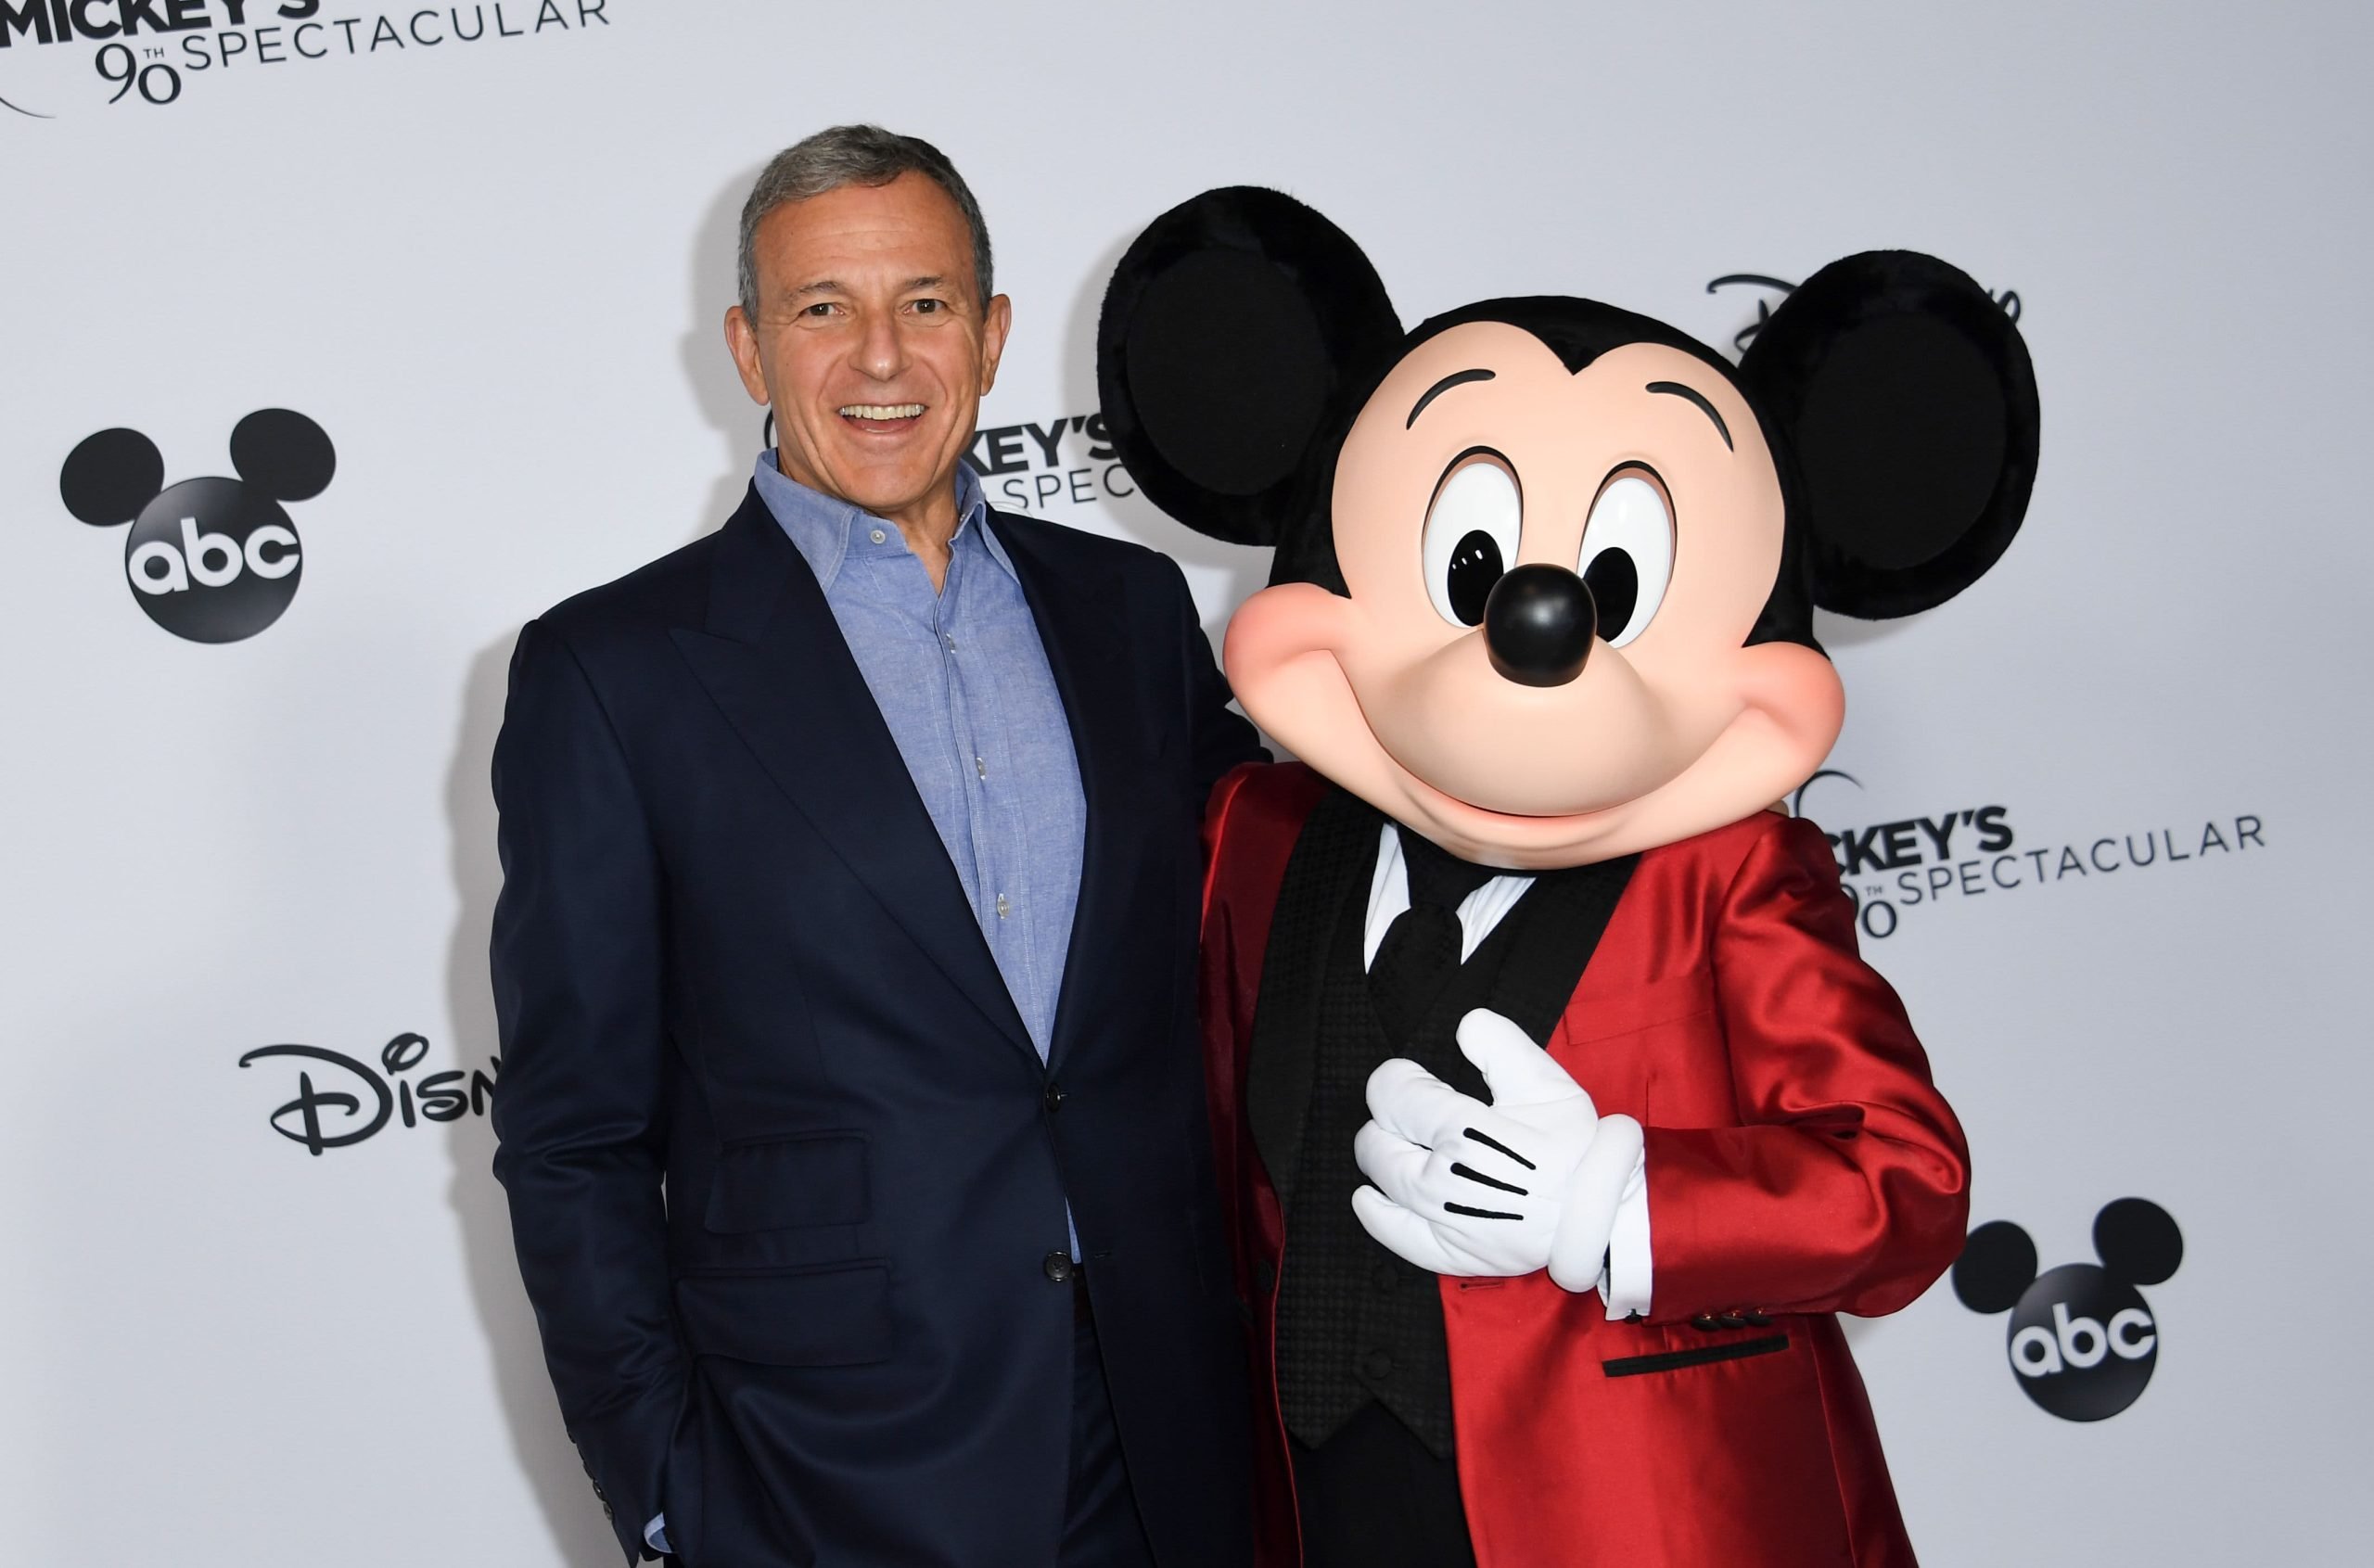 disney-exec,-investor-cautioned-company-on-sports-betting